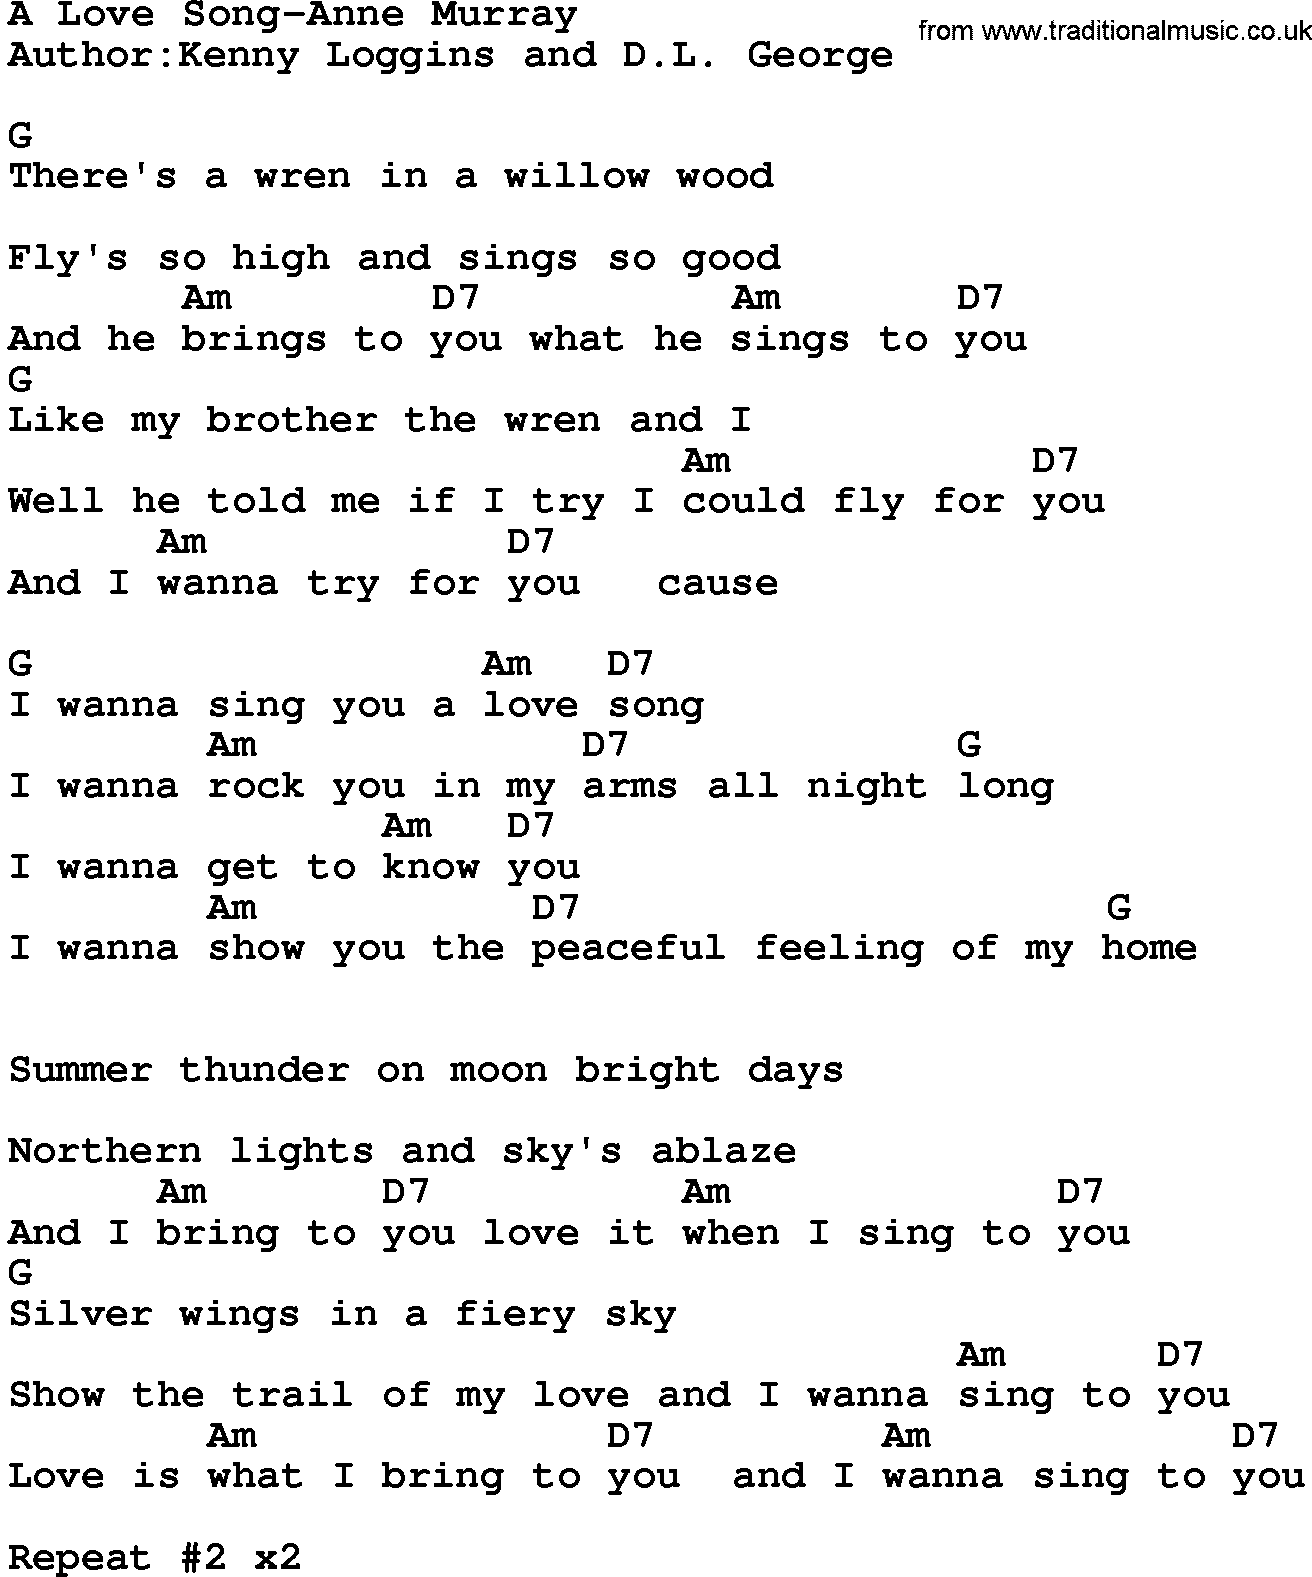 Country music song: A Love Song-Anne Murray lyrics and chords